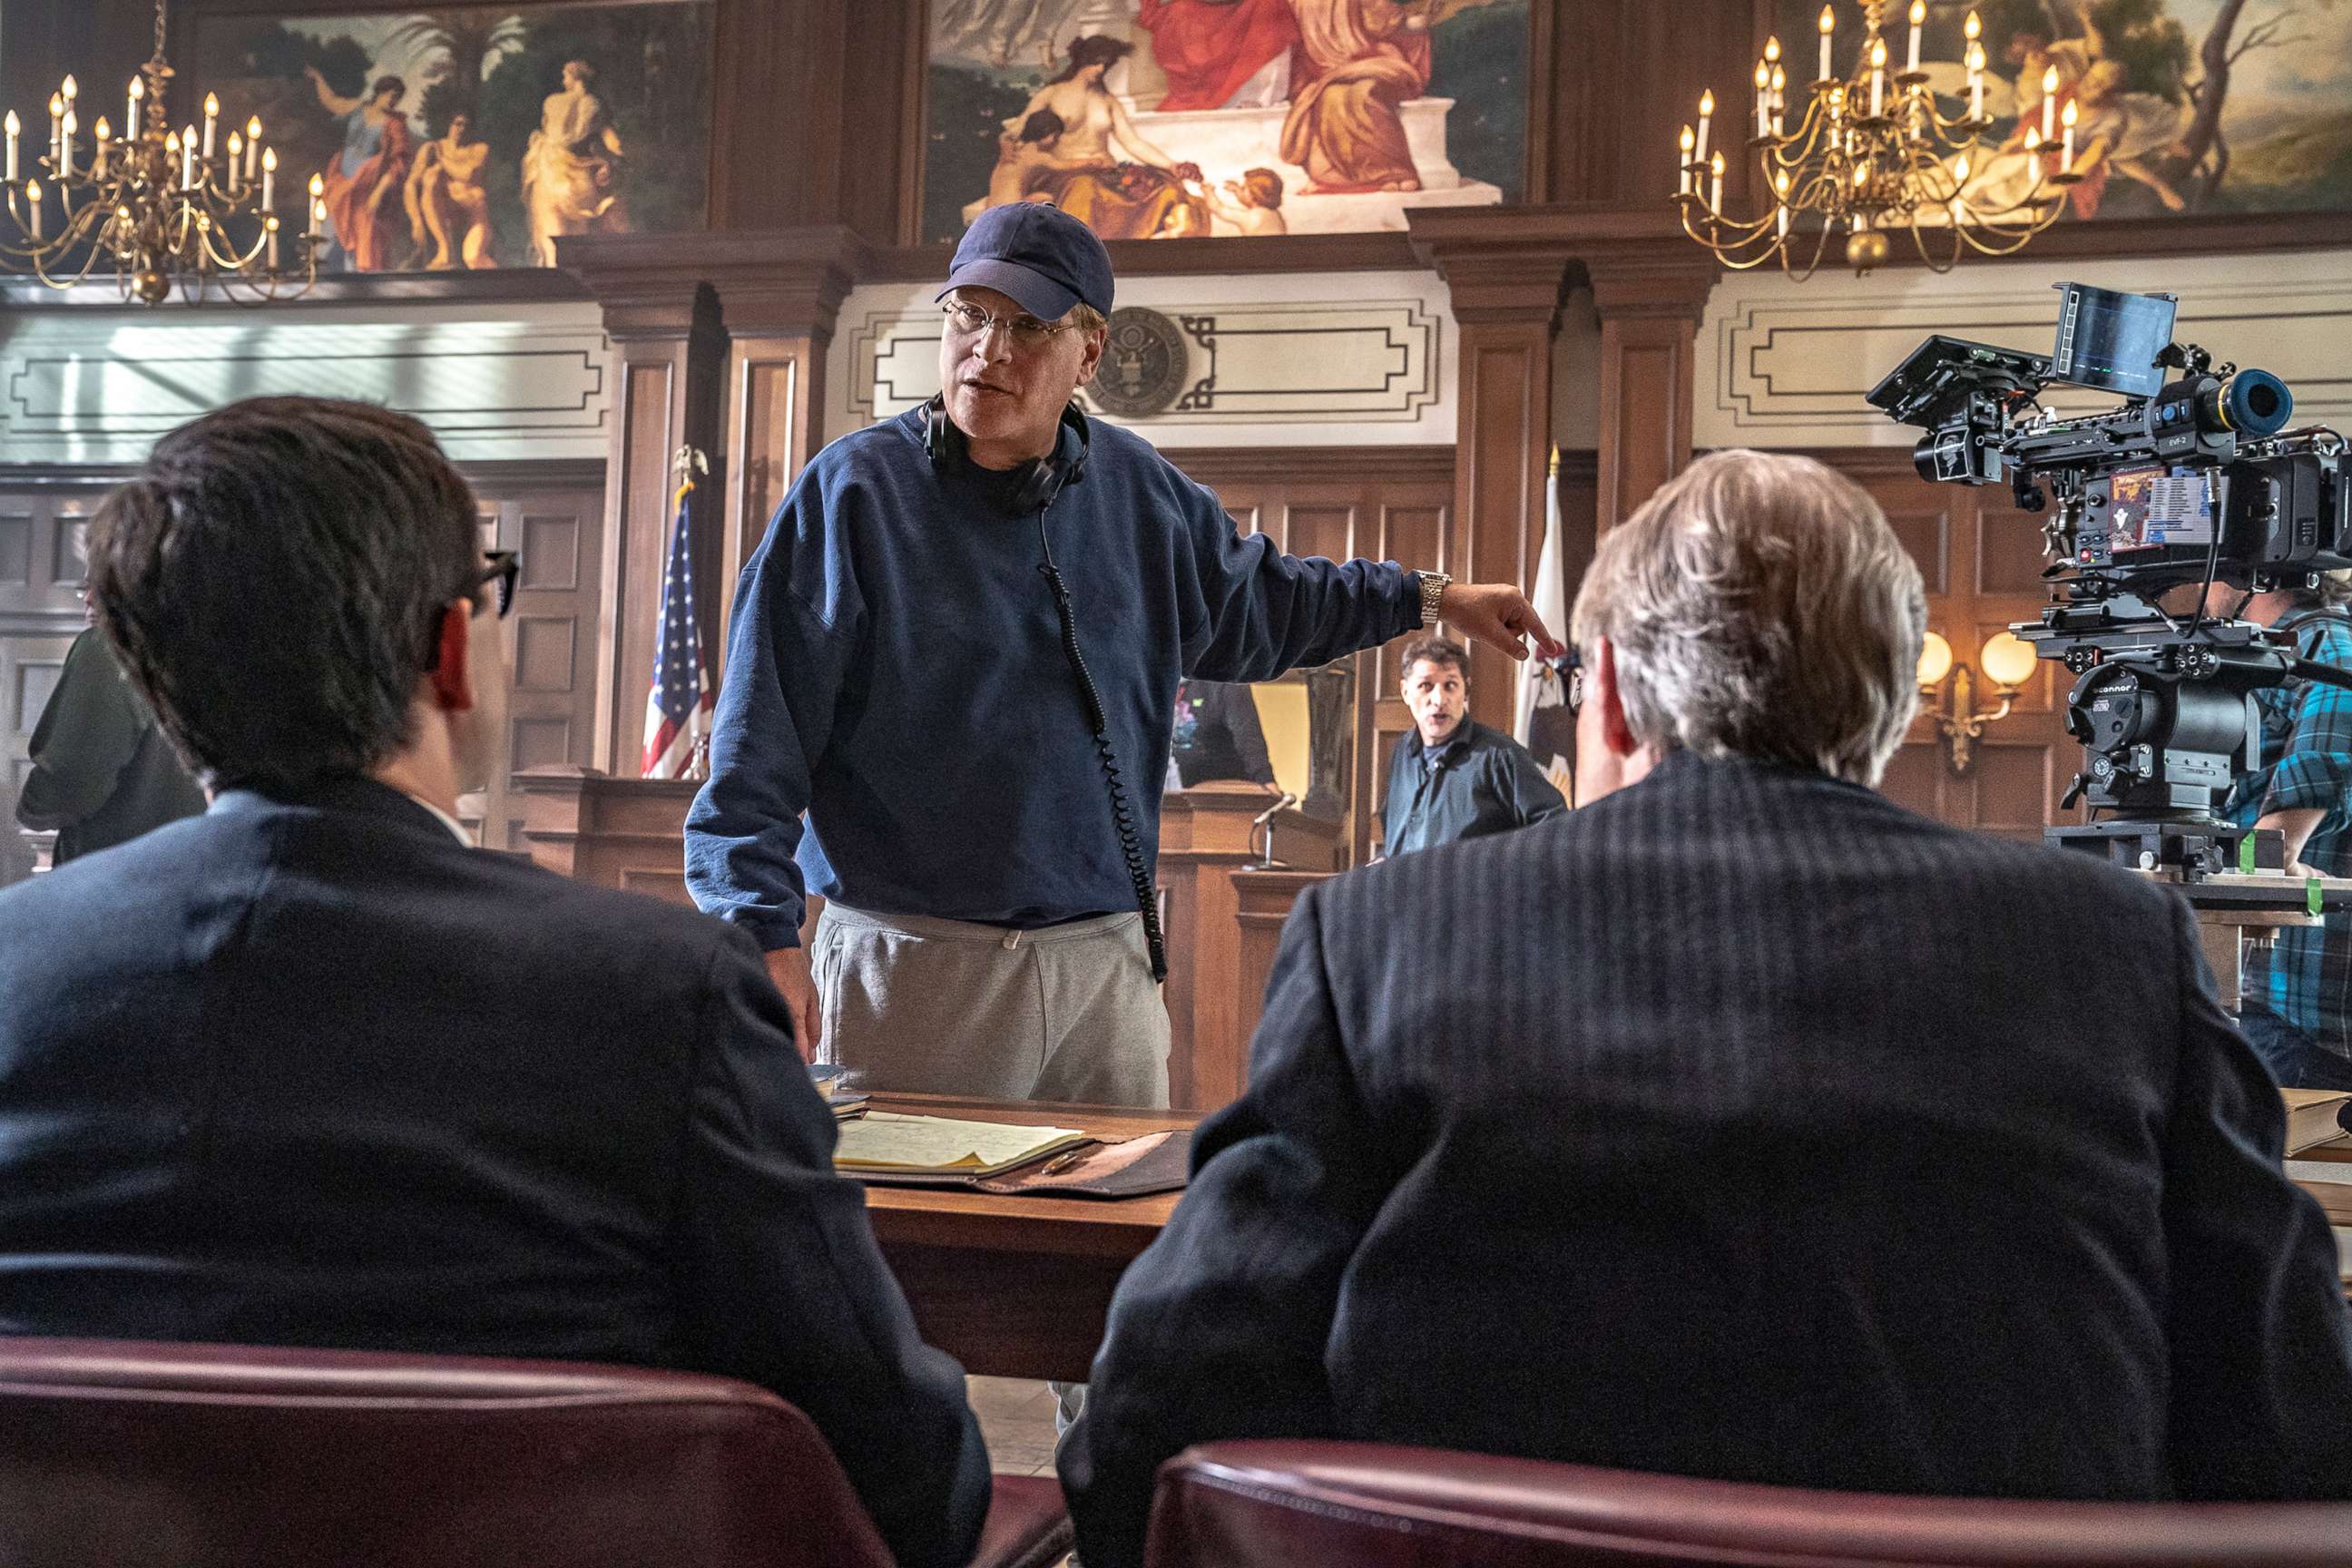 PHOTO: Director Aaron Sorkin during the filming of "The Trial of the Chicago 7."